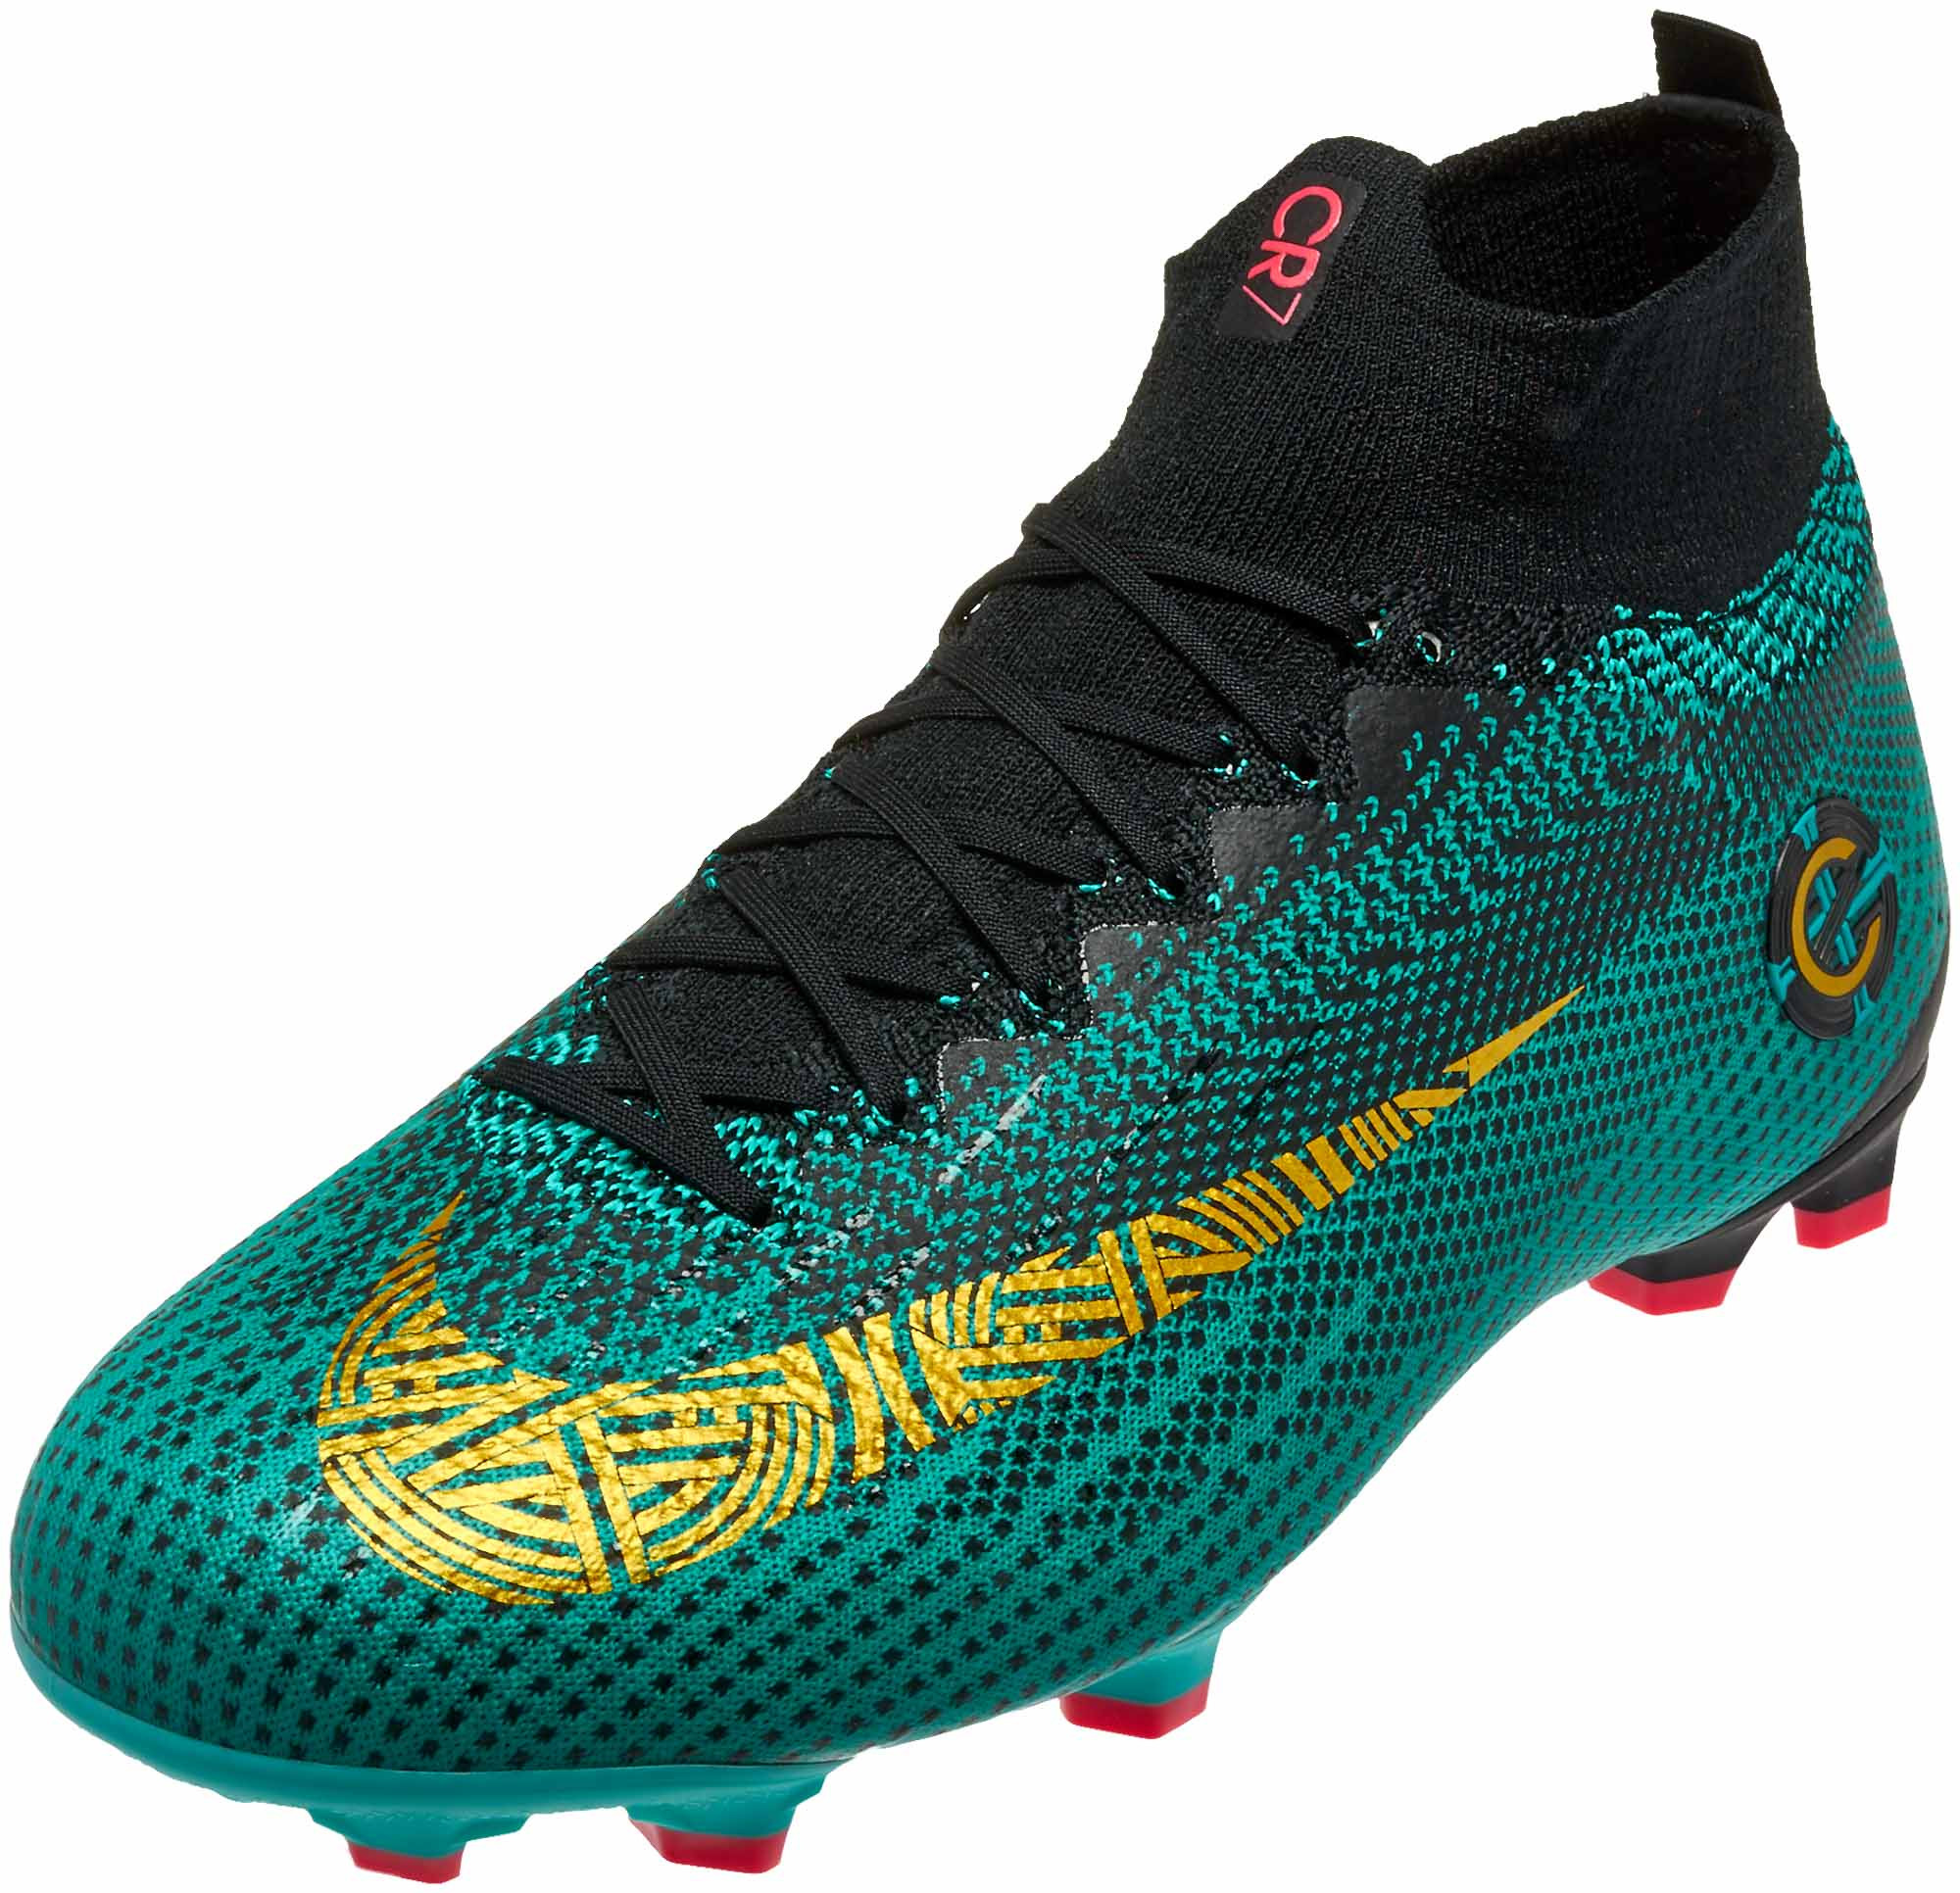 Cr7 Shoes For Kids Indoor
 Nike Kids Mercurial Superfly 6 Elite FG CR7 Clear Jade